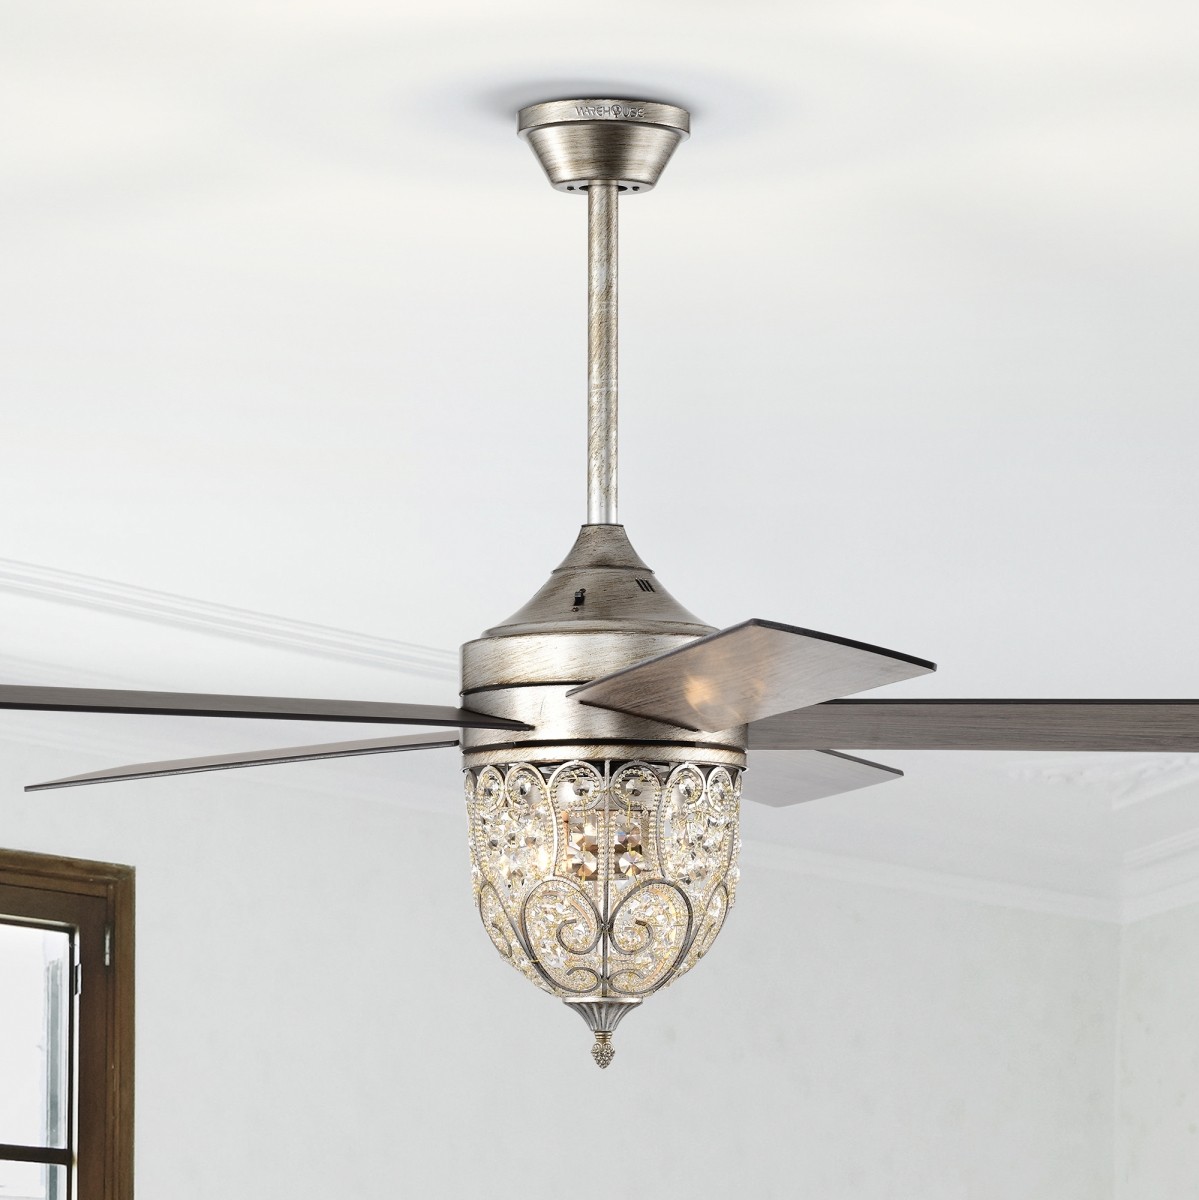 Jaxen 52 in. 2-Light Indoor Antique Silver Finish Ceiling Fan with Light Kit and Remote